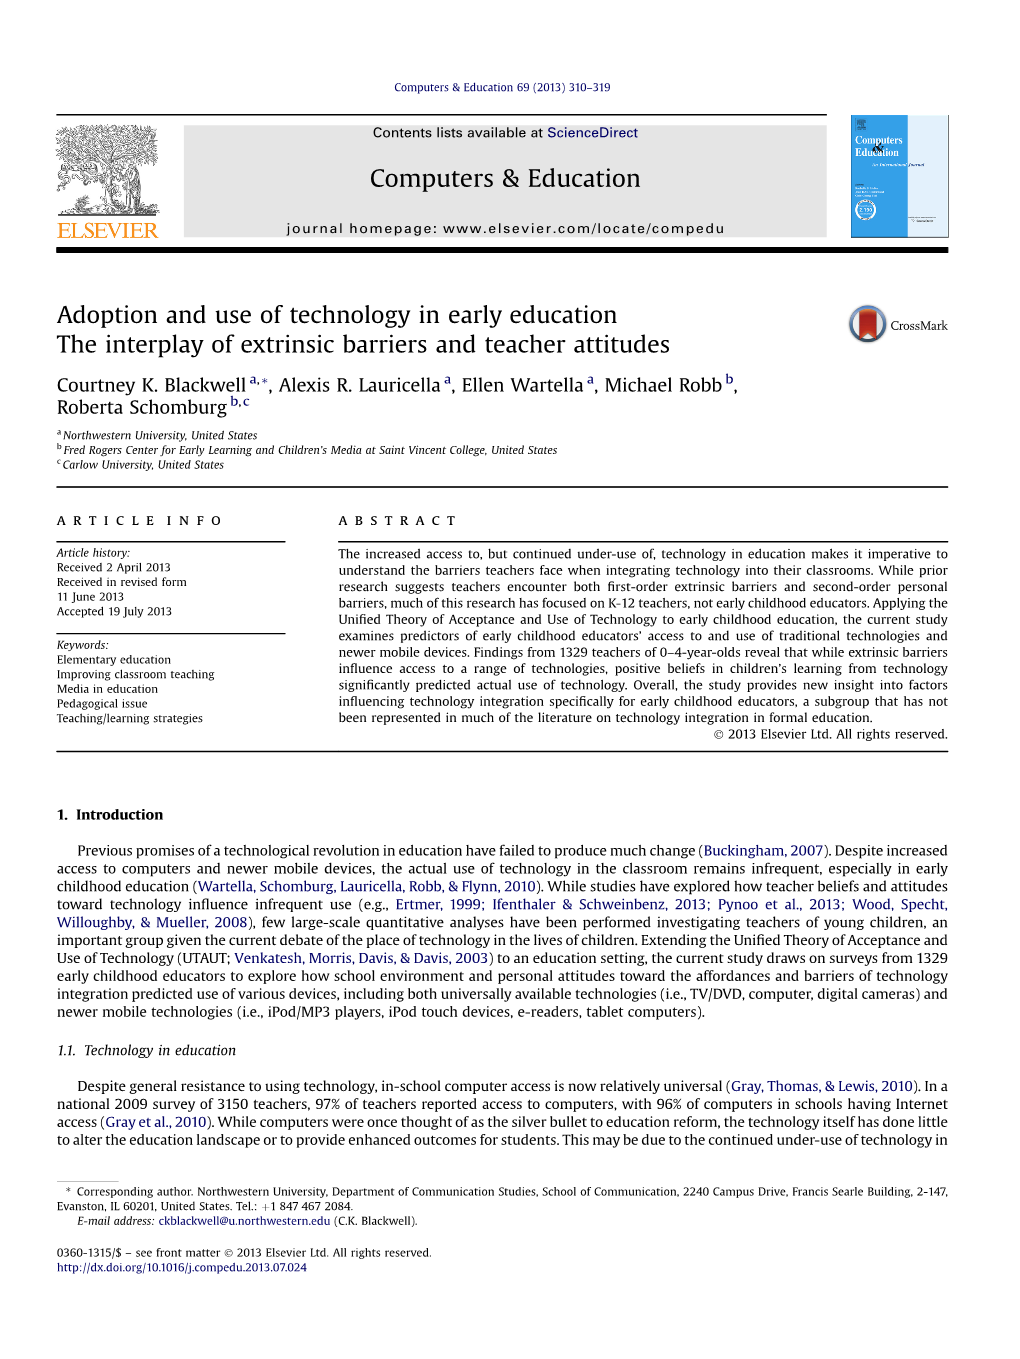 Adoption and Use of Technology in Early Education the Interplay of Extrinsic Barriers and Teacher Attitudes